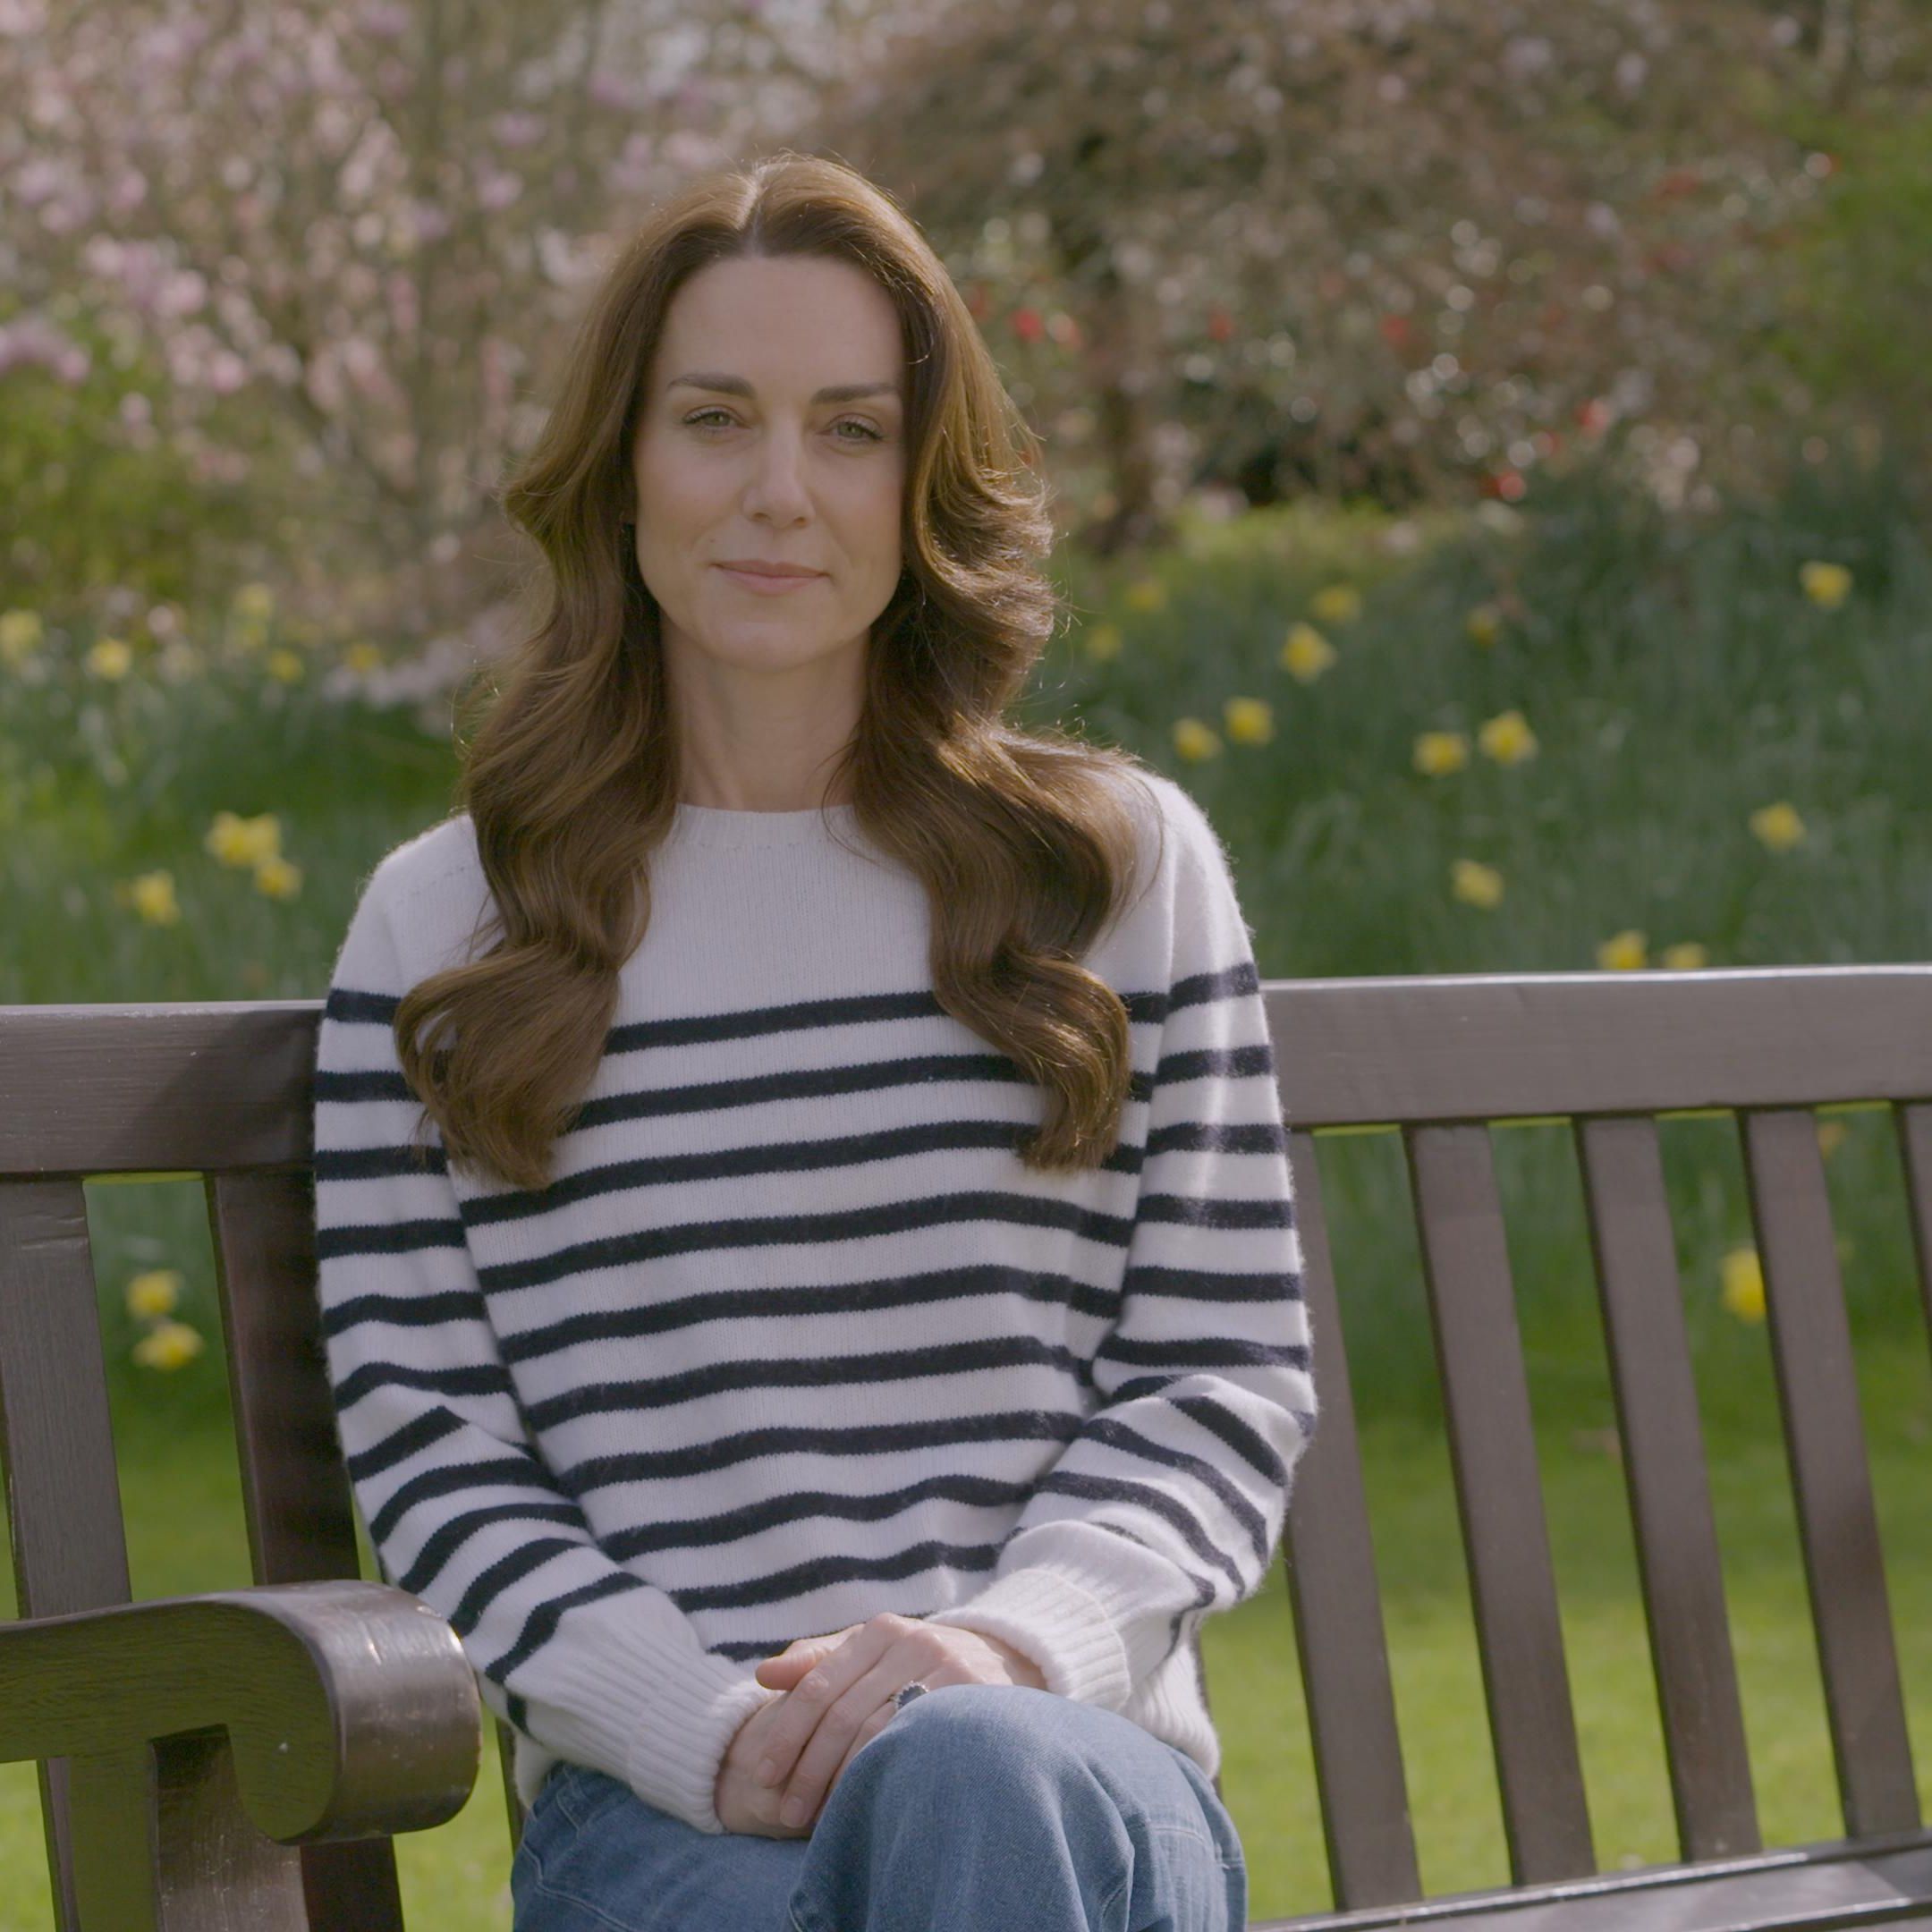 Getty Images Made an Editor’s Note to Kate Middleton’s Cancer Announcement Video